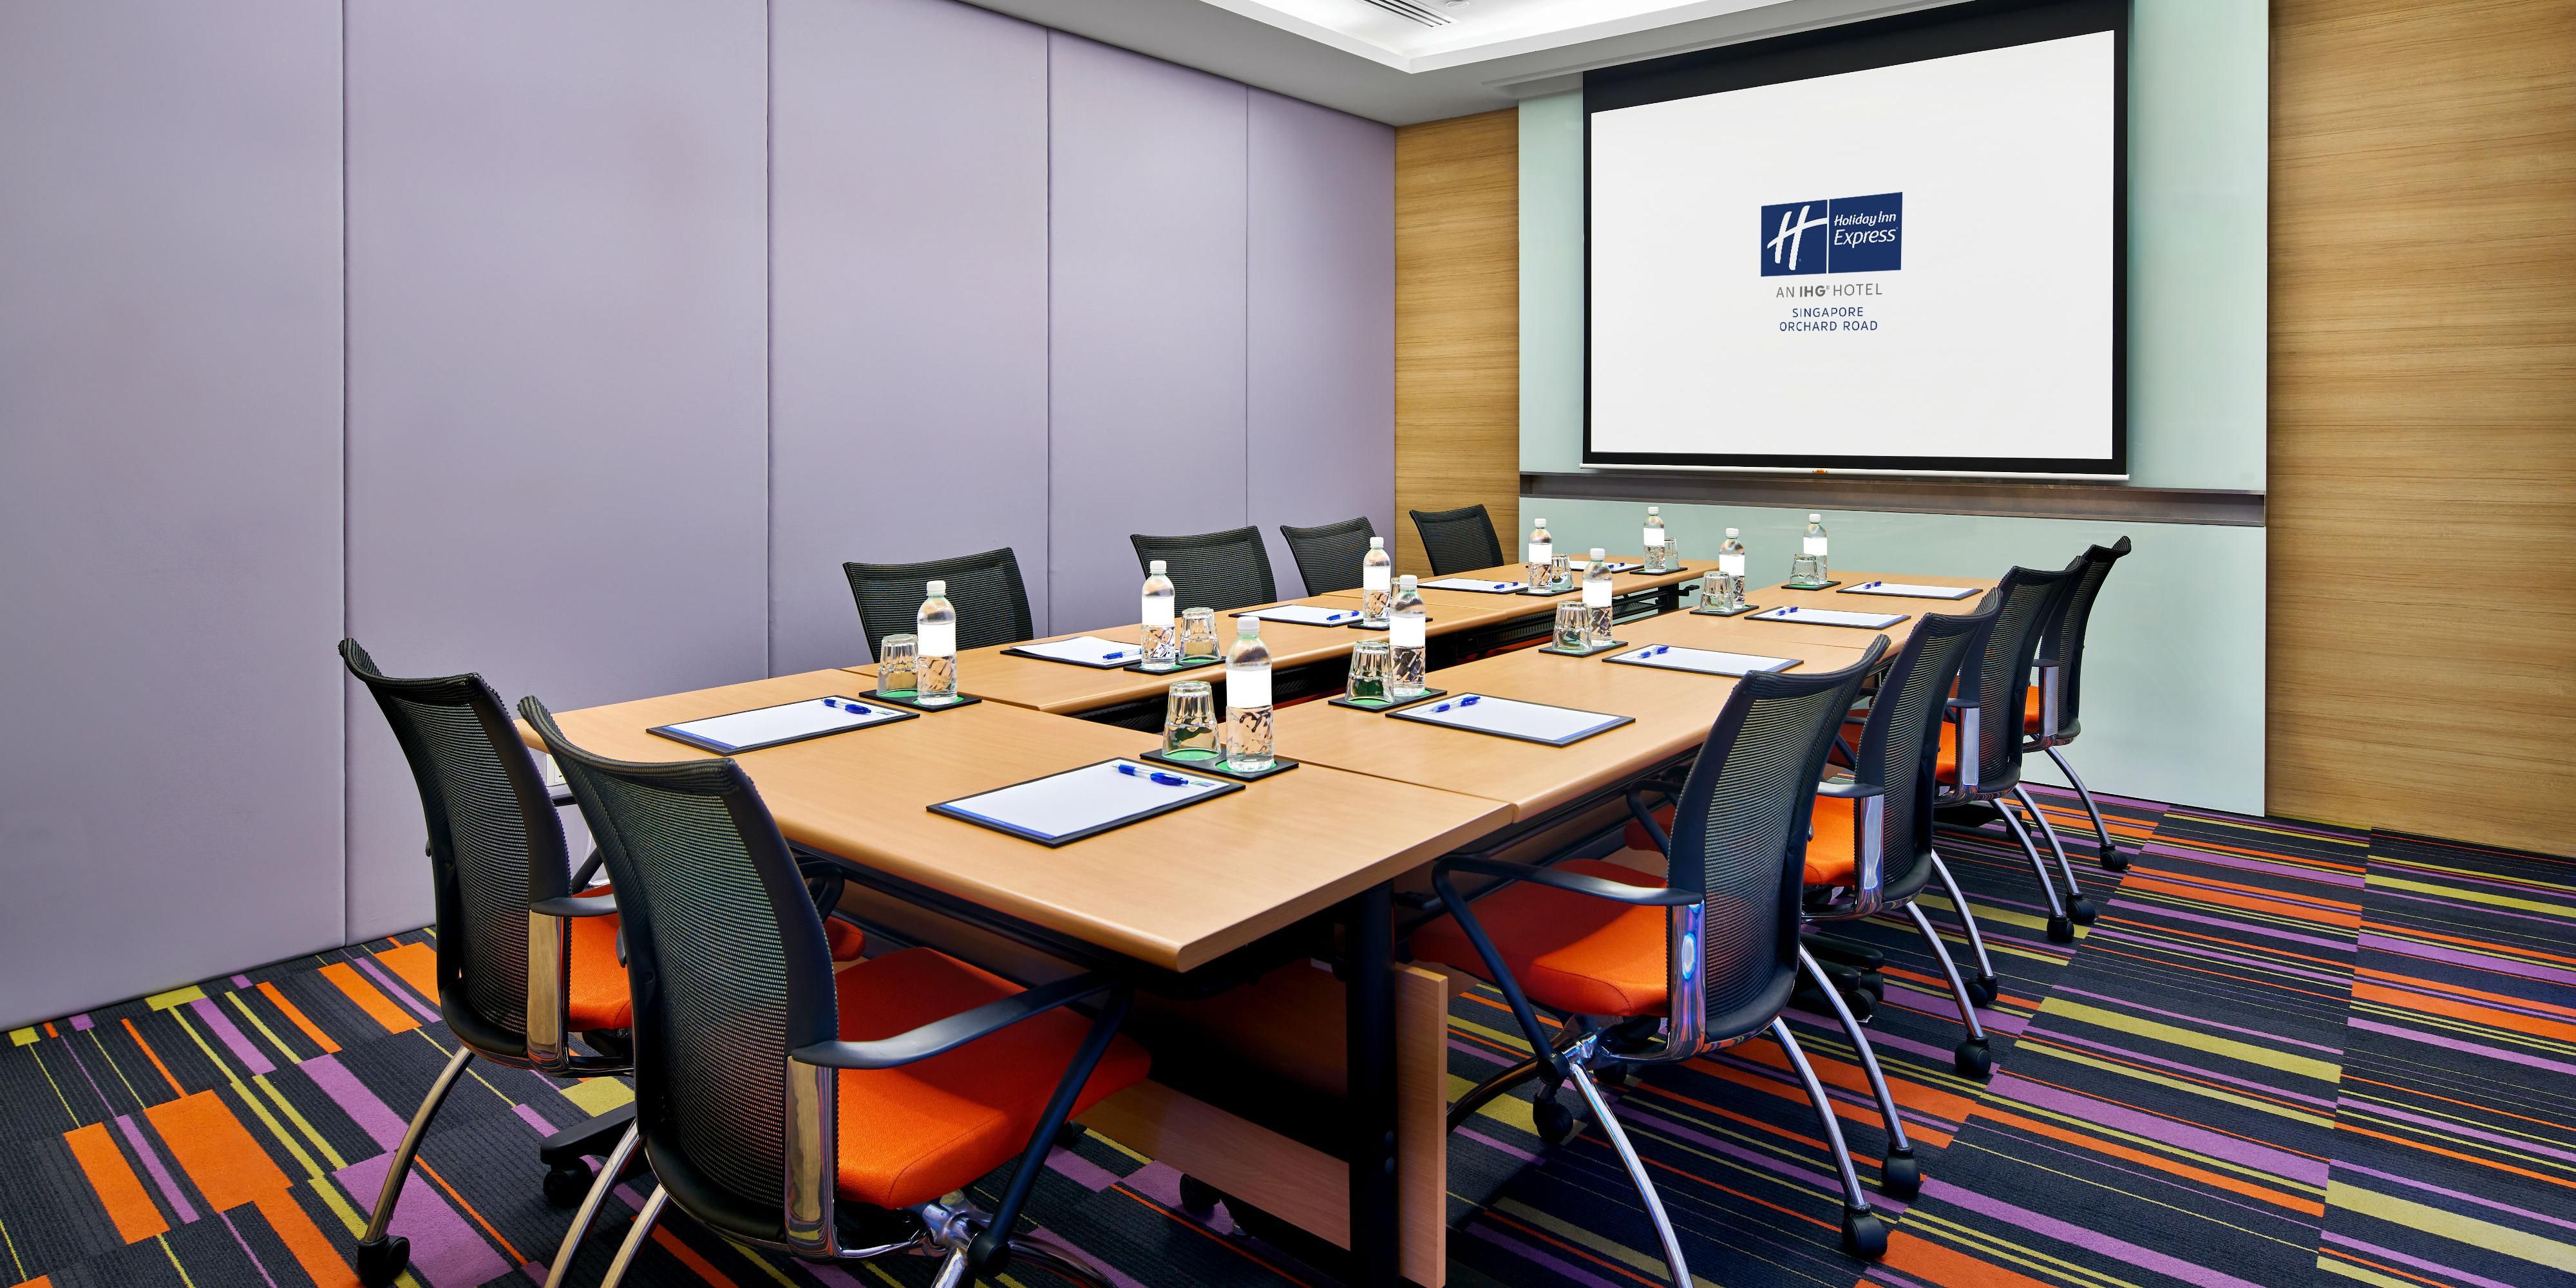 Centrally located in Orchard Road, our meeting room caters to up to 12 guests, features natural daylight, and is fully equipped with audio and visual equipment, making it ideal for intimate meetings in the heart of the city. 

For enquiries or to book, contact us at +65 6690 3173 or email SuHan.Ng@ihg.com.